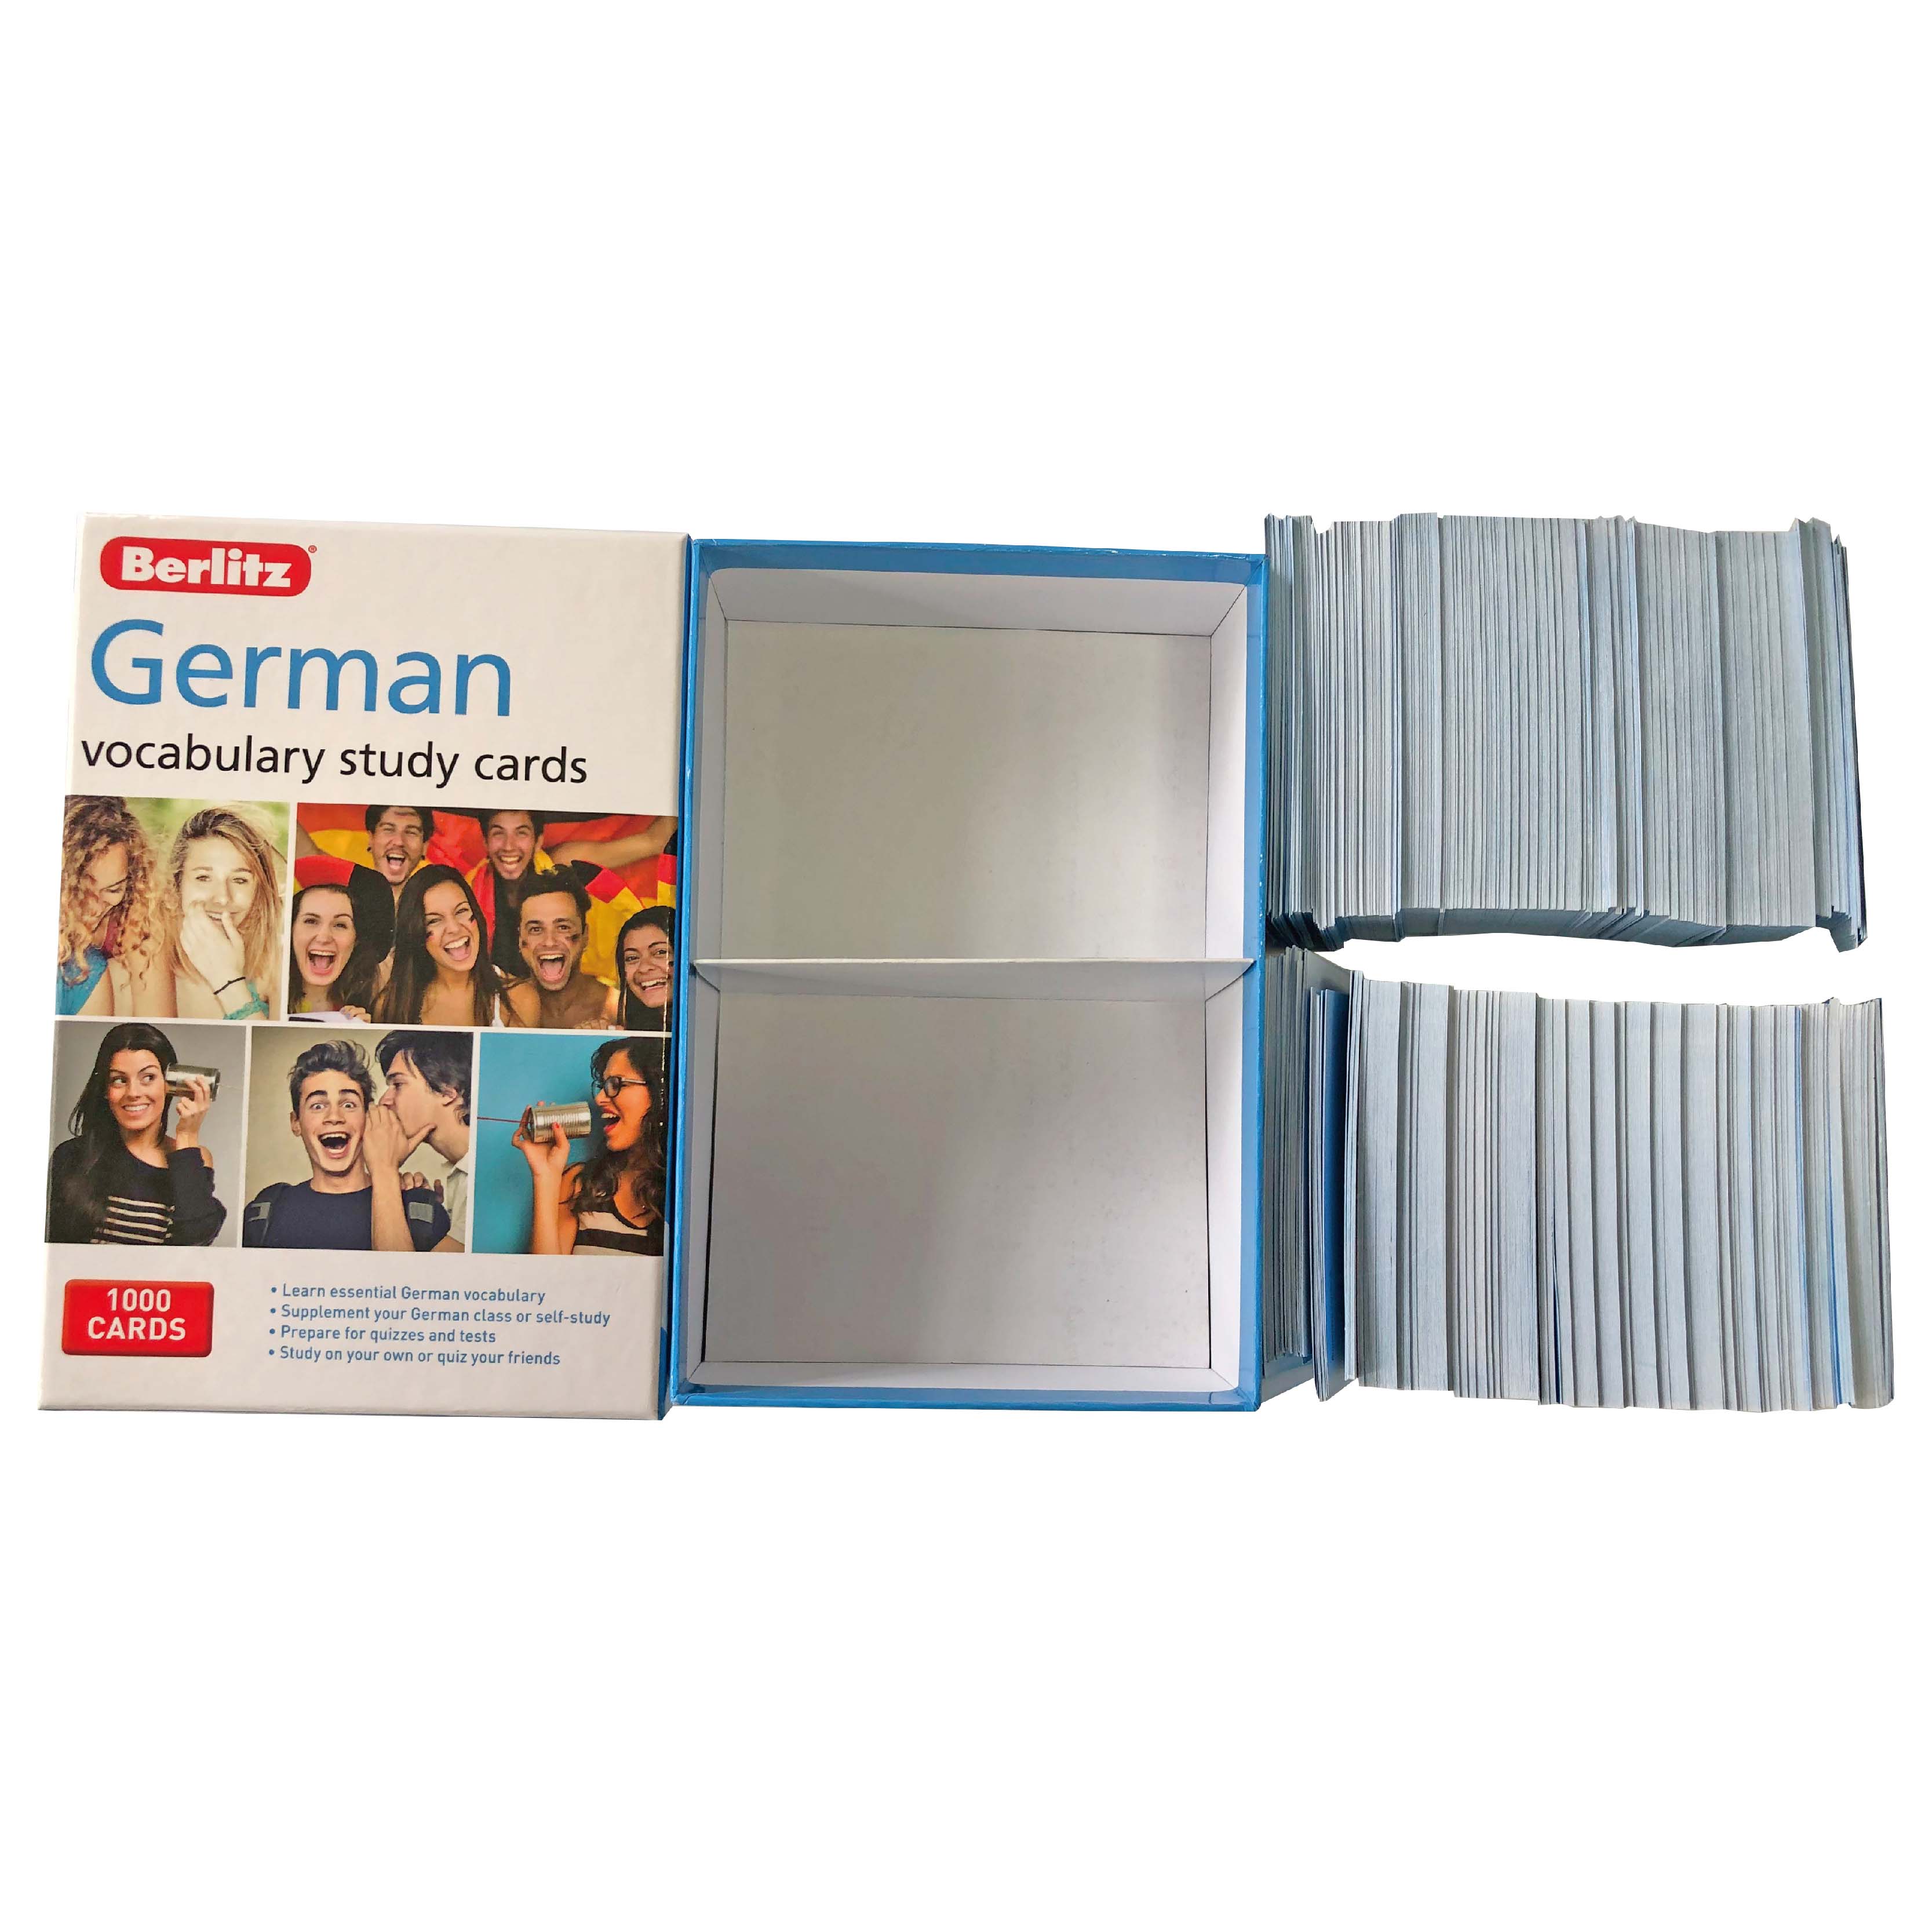 German vocabulary study cards & cardboard boxes